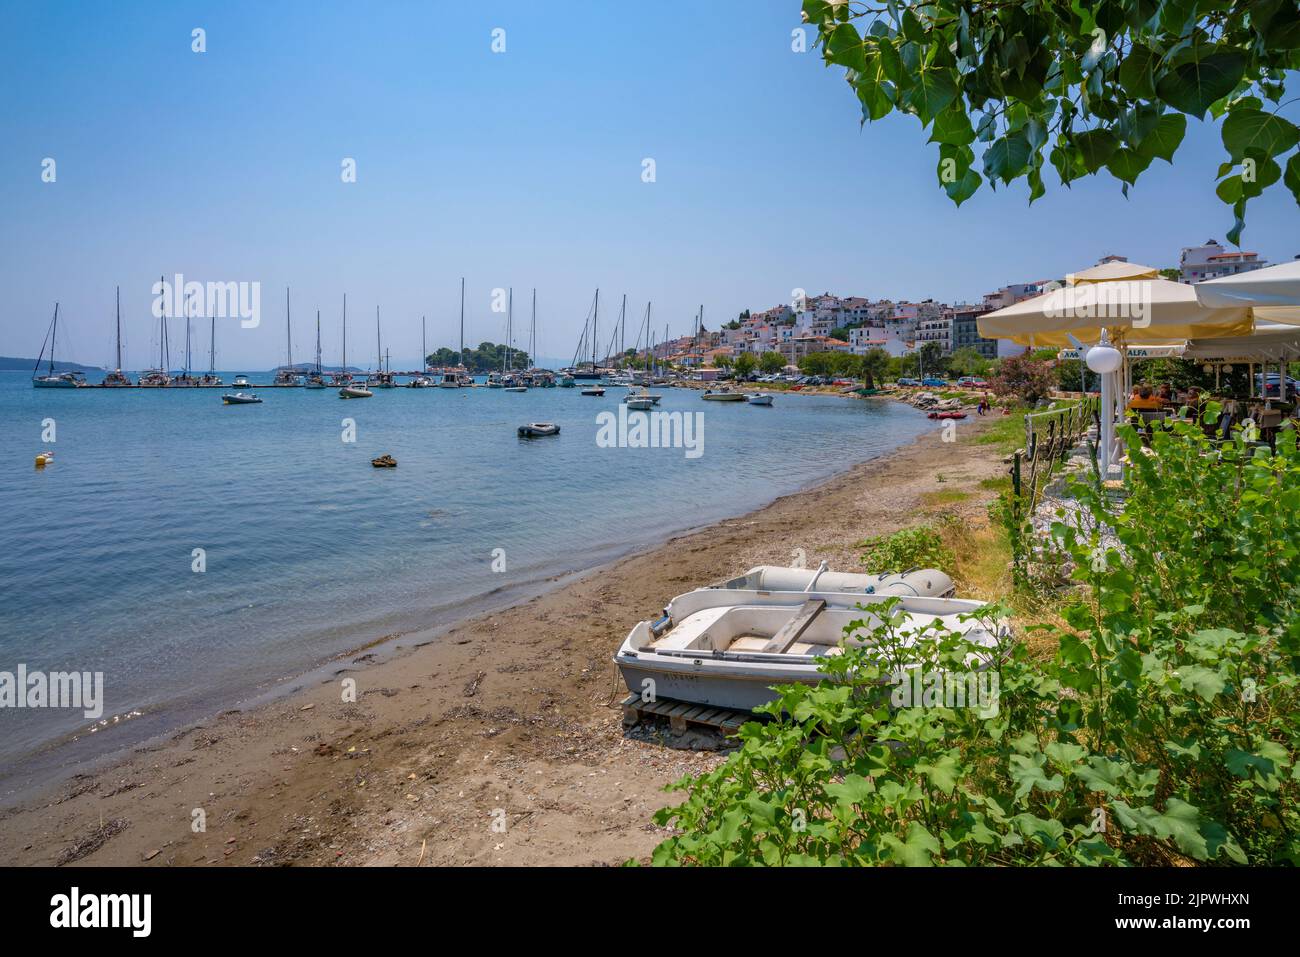 View of boats and restaurants in Skiathos Town, Skiathos Island, Sporades Islands, Greek Islands, Greece, Europe Stock Photo